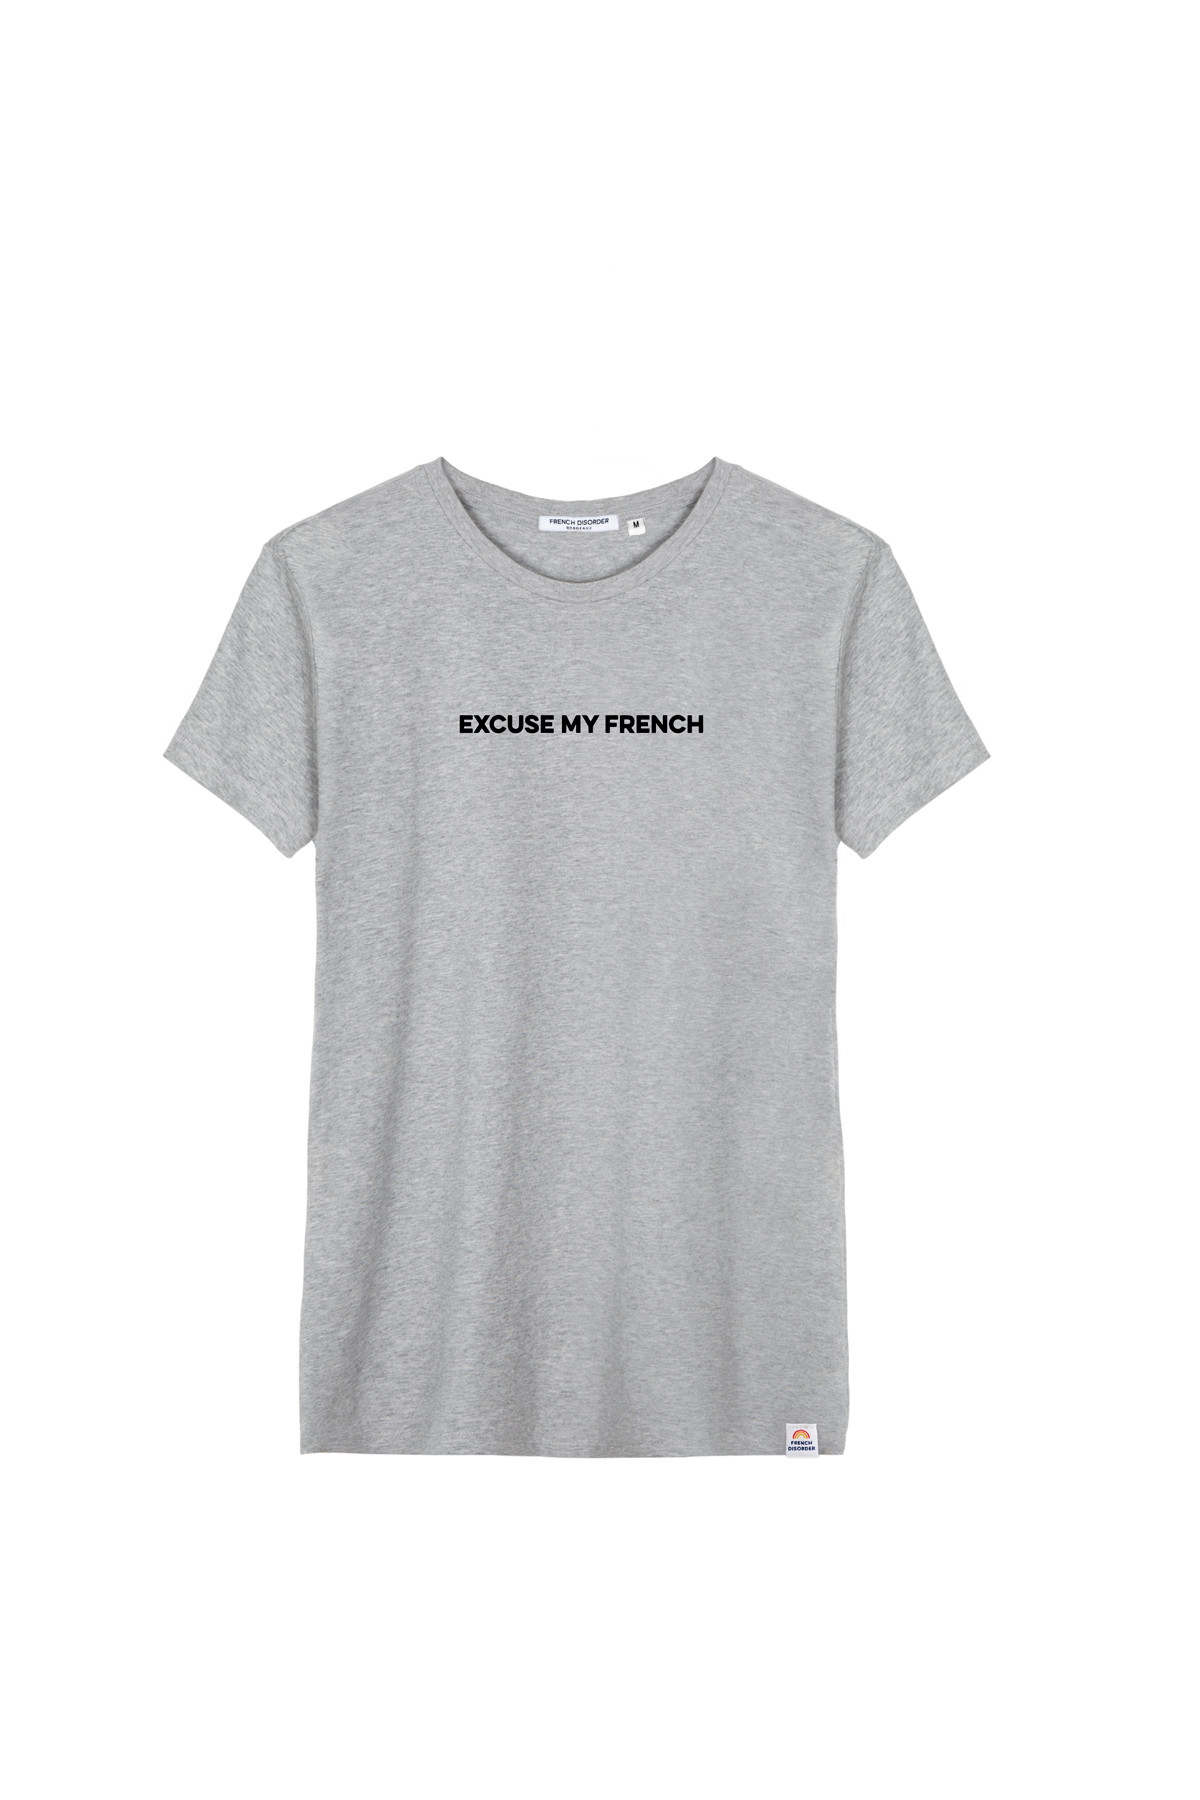 T-shirt EXCUSE MY FRENCH French Disorder